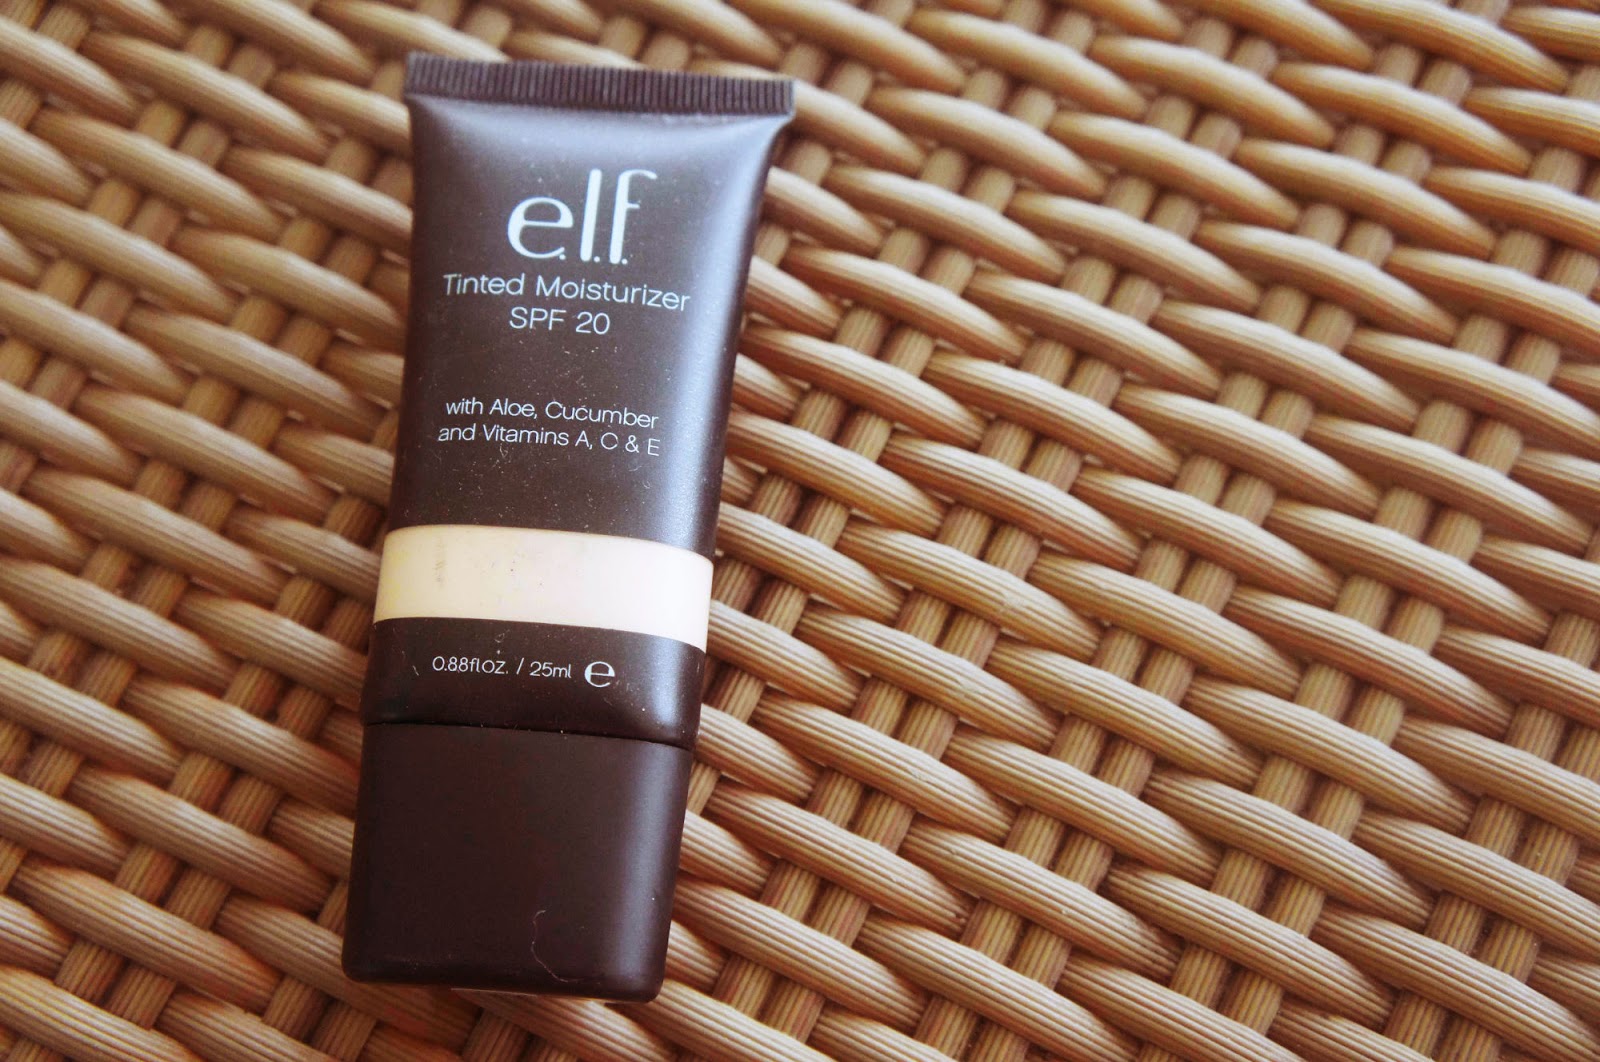 ELF Tinted Moisturizer with SPF 20 in Porcelain Product Review